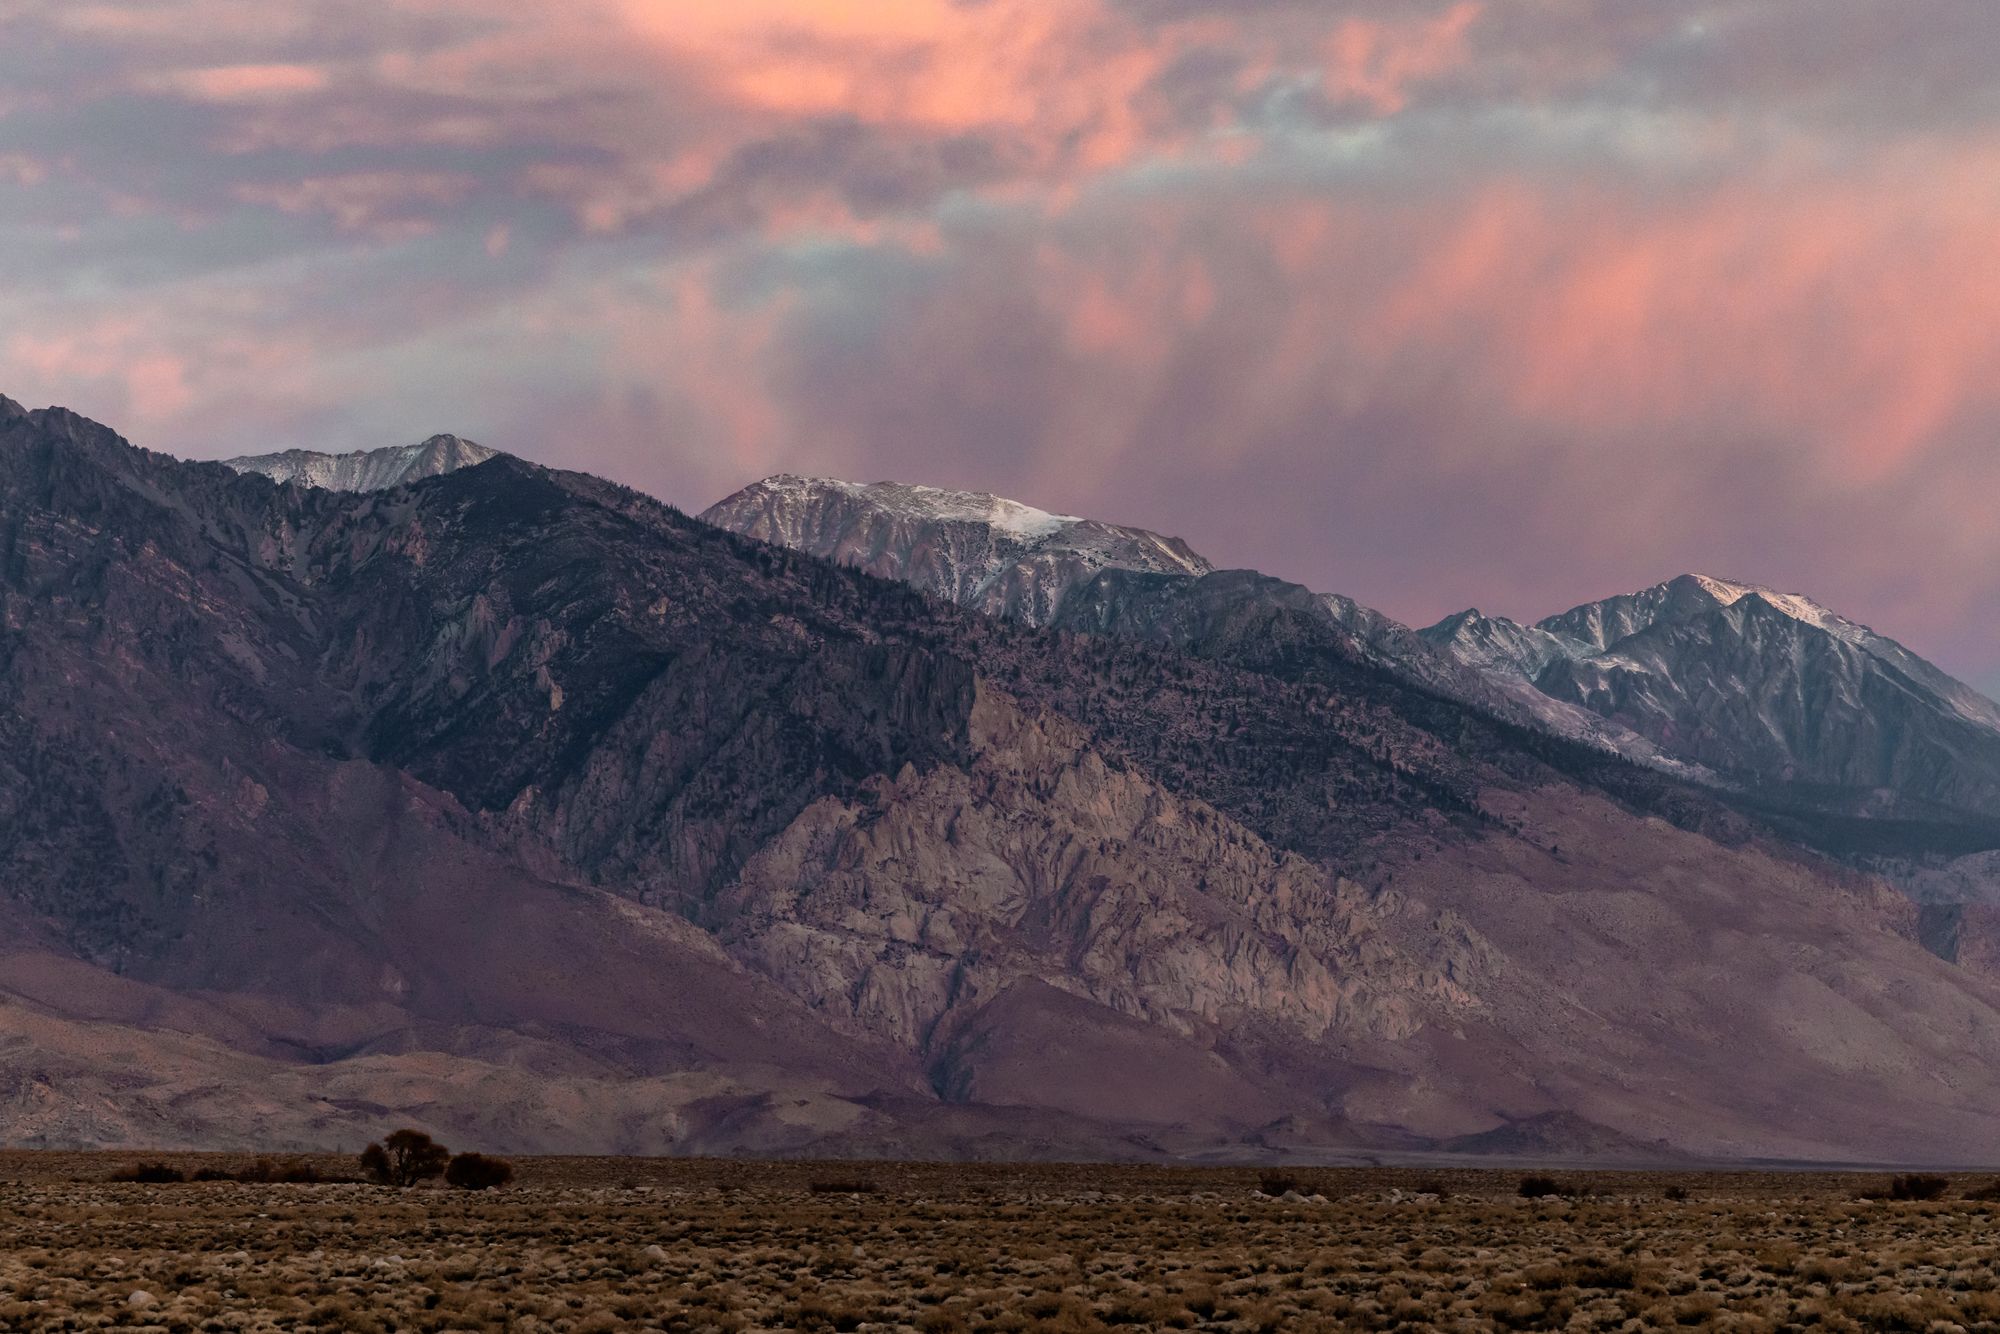 The first soft pink light of the day touching Goodale Mountain in the distance. In the foreground is the high desert floor with a few trees and many shrubs.